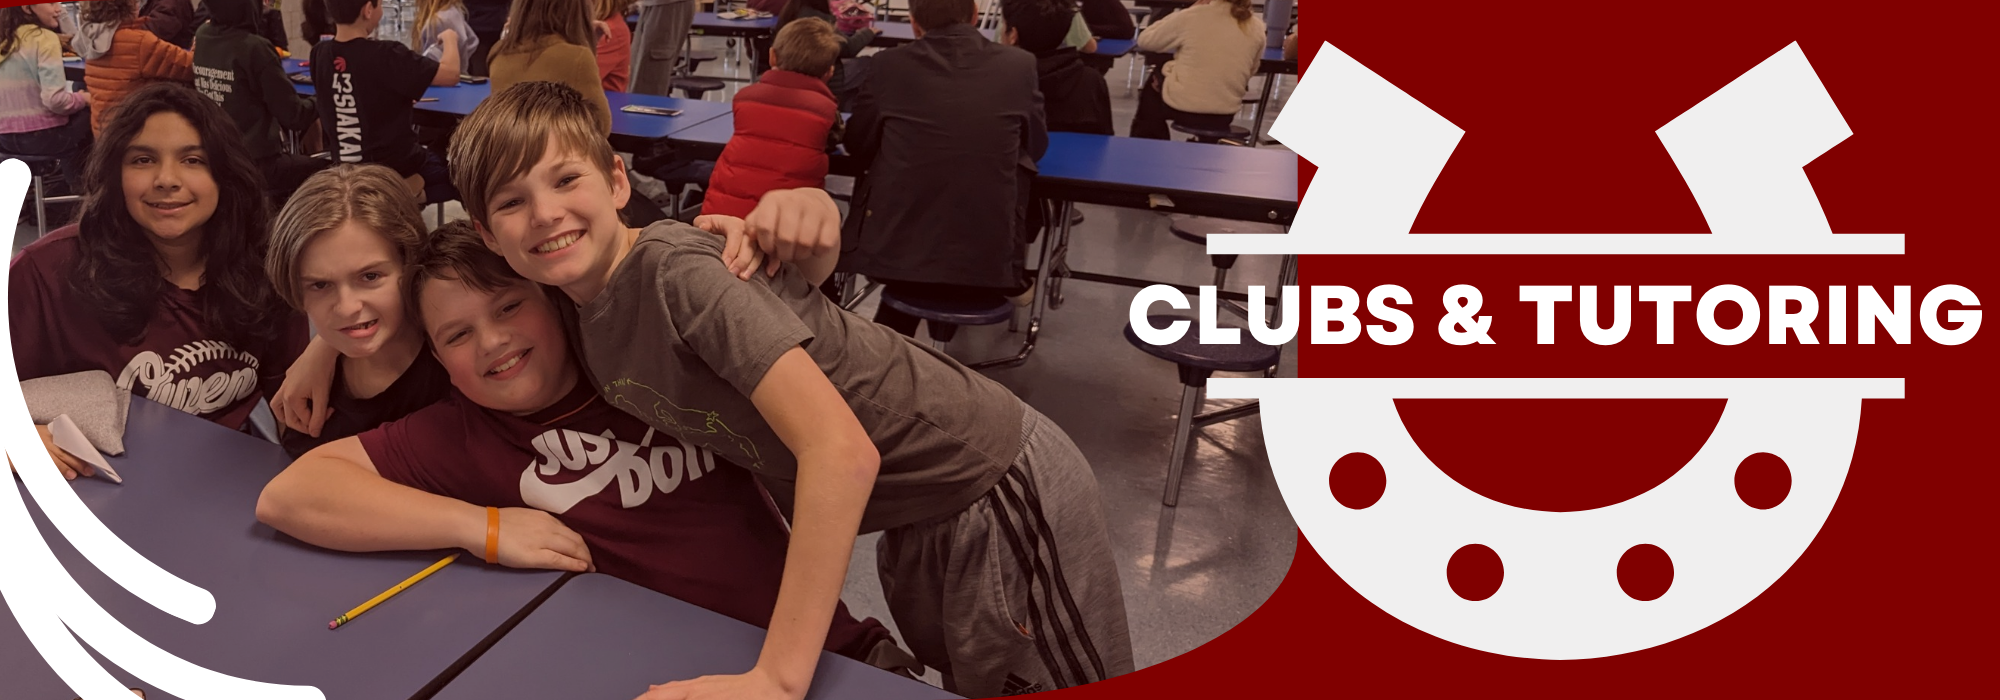 clubs and tutoring banner with students posing at a table